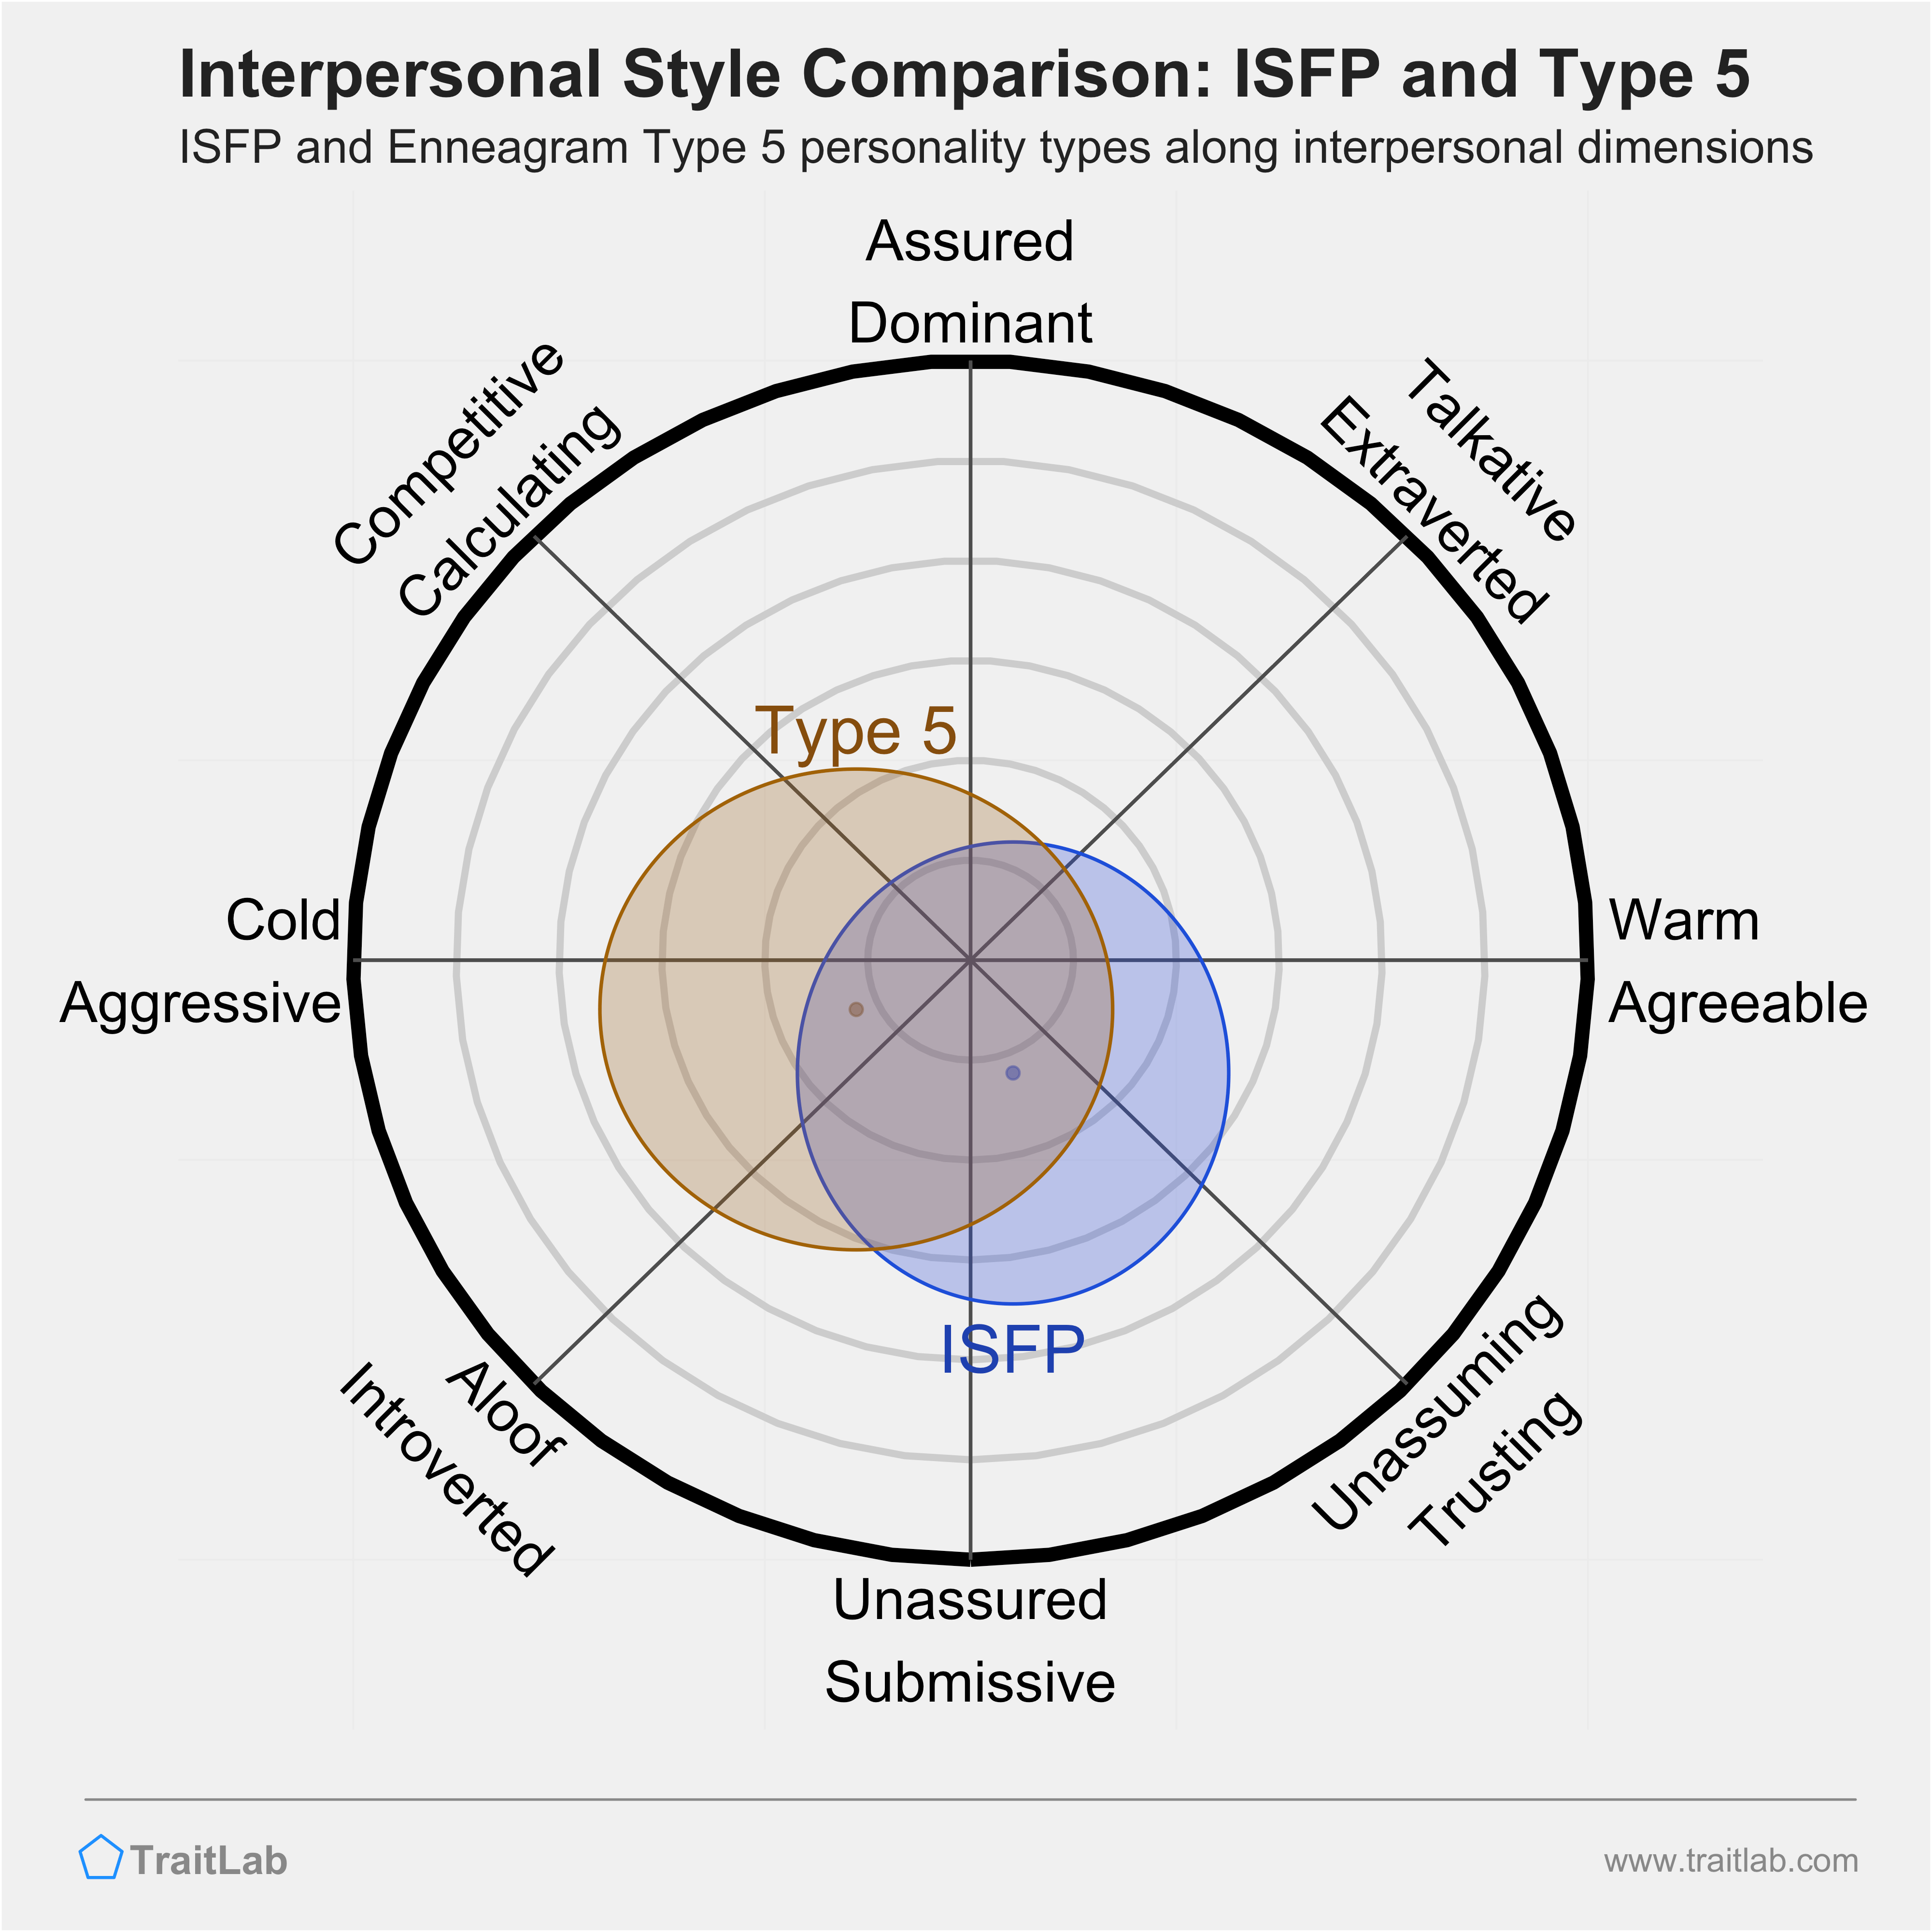 Enneagram ISFP and Type 5 comparison across interpersonal dimensions